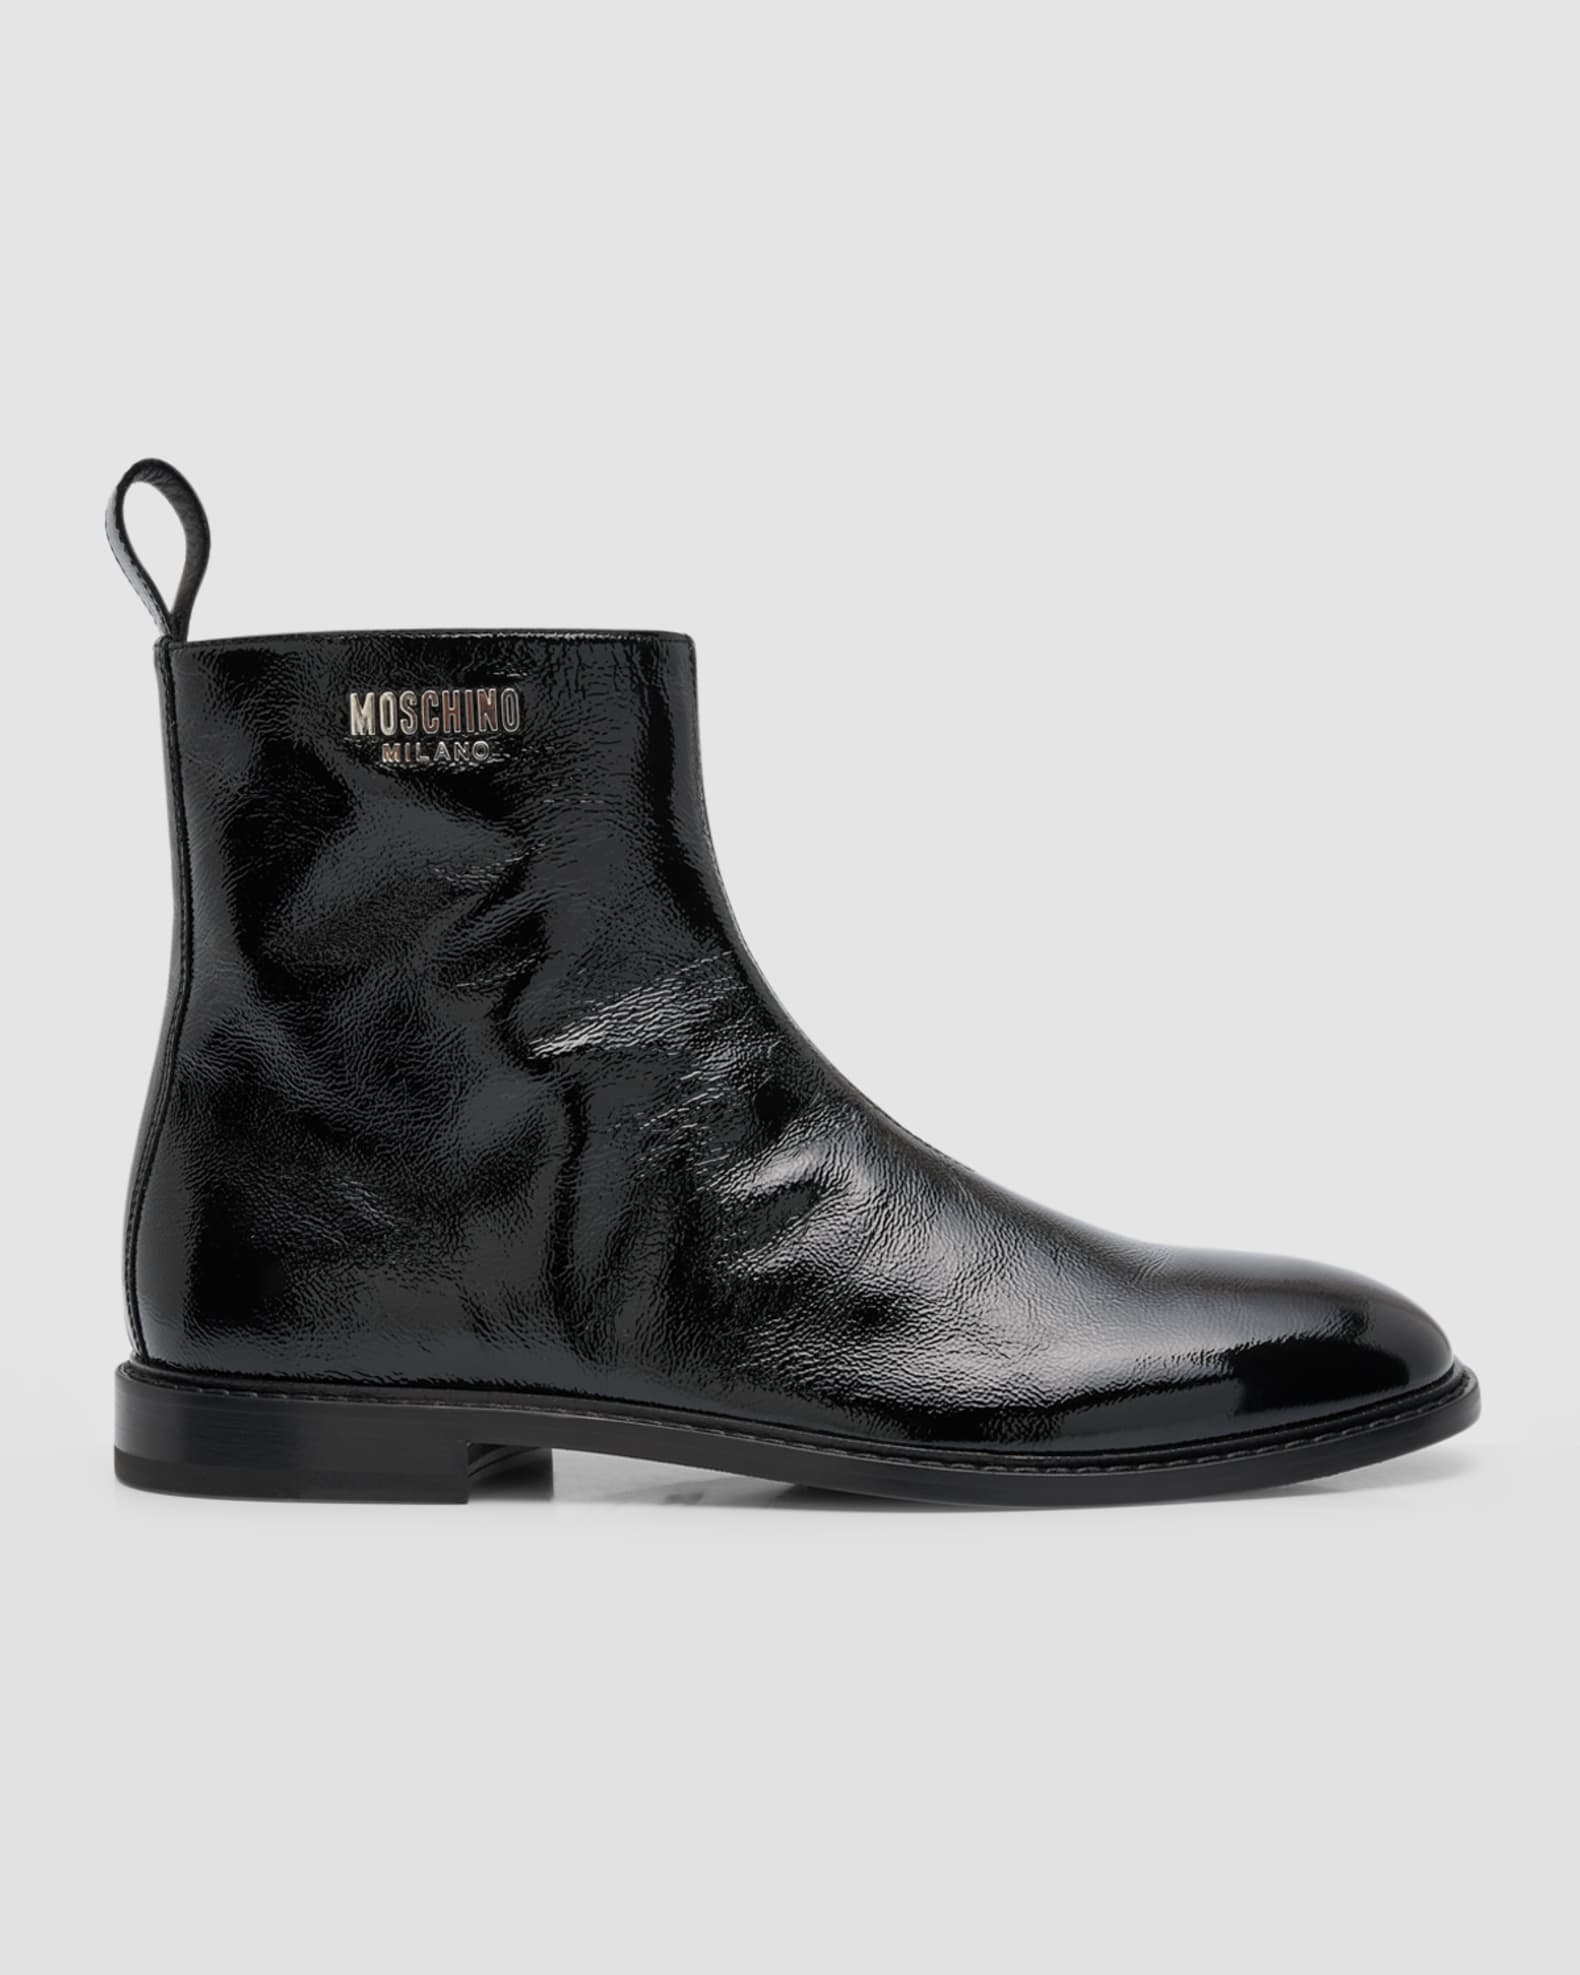 Moschino Men's Textured Logo-Plate Ankle Boots | Neiman Marcus